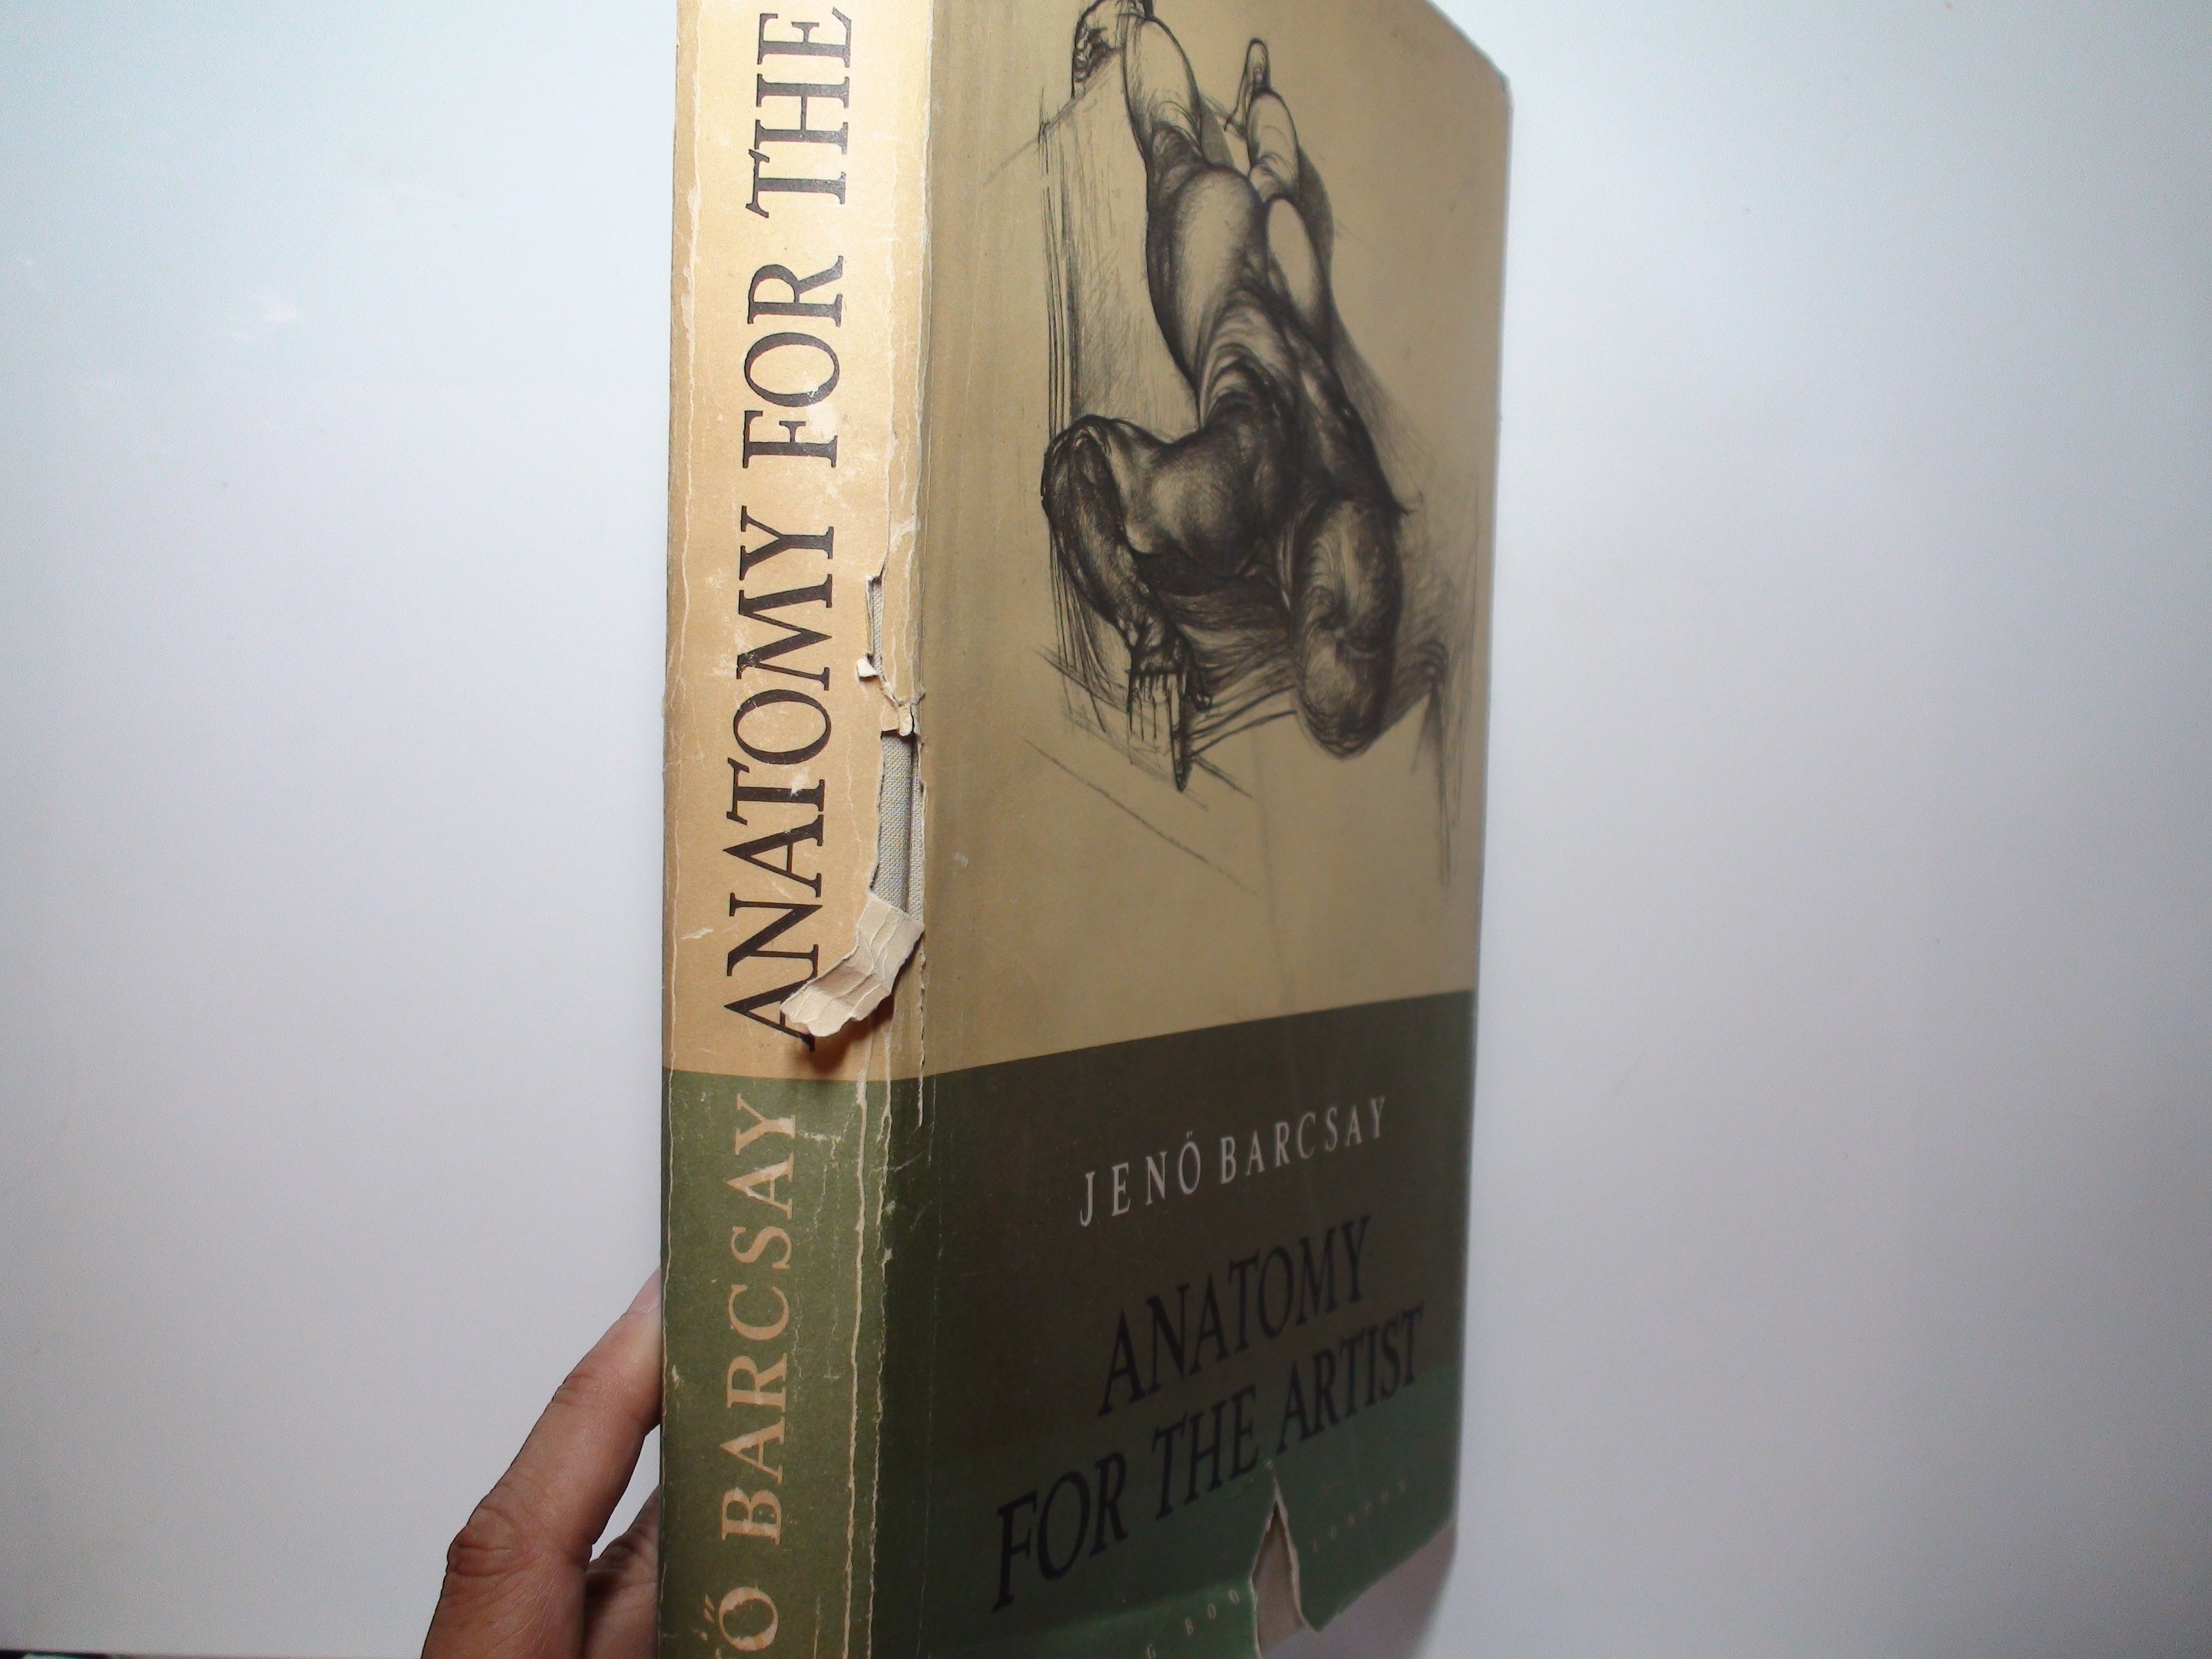 Anatomy For the Artist, Drawings and Text By Jeno Barcsay, Illustrated, 1968